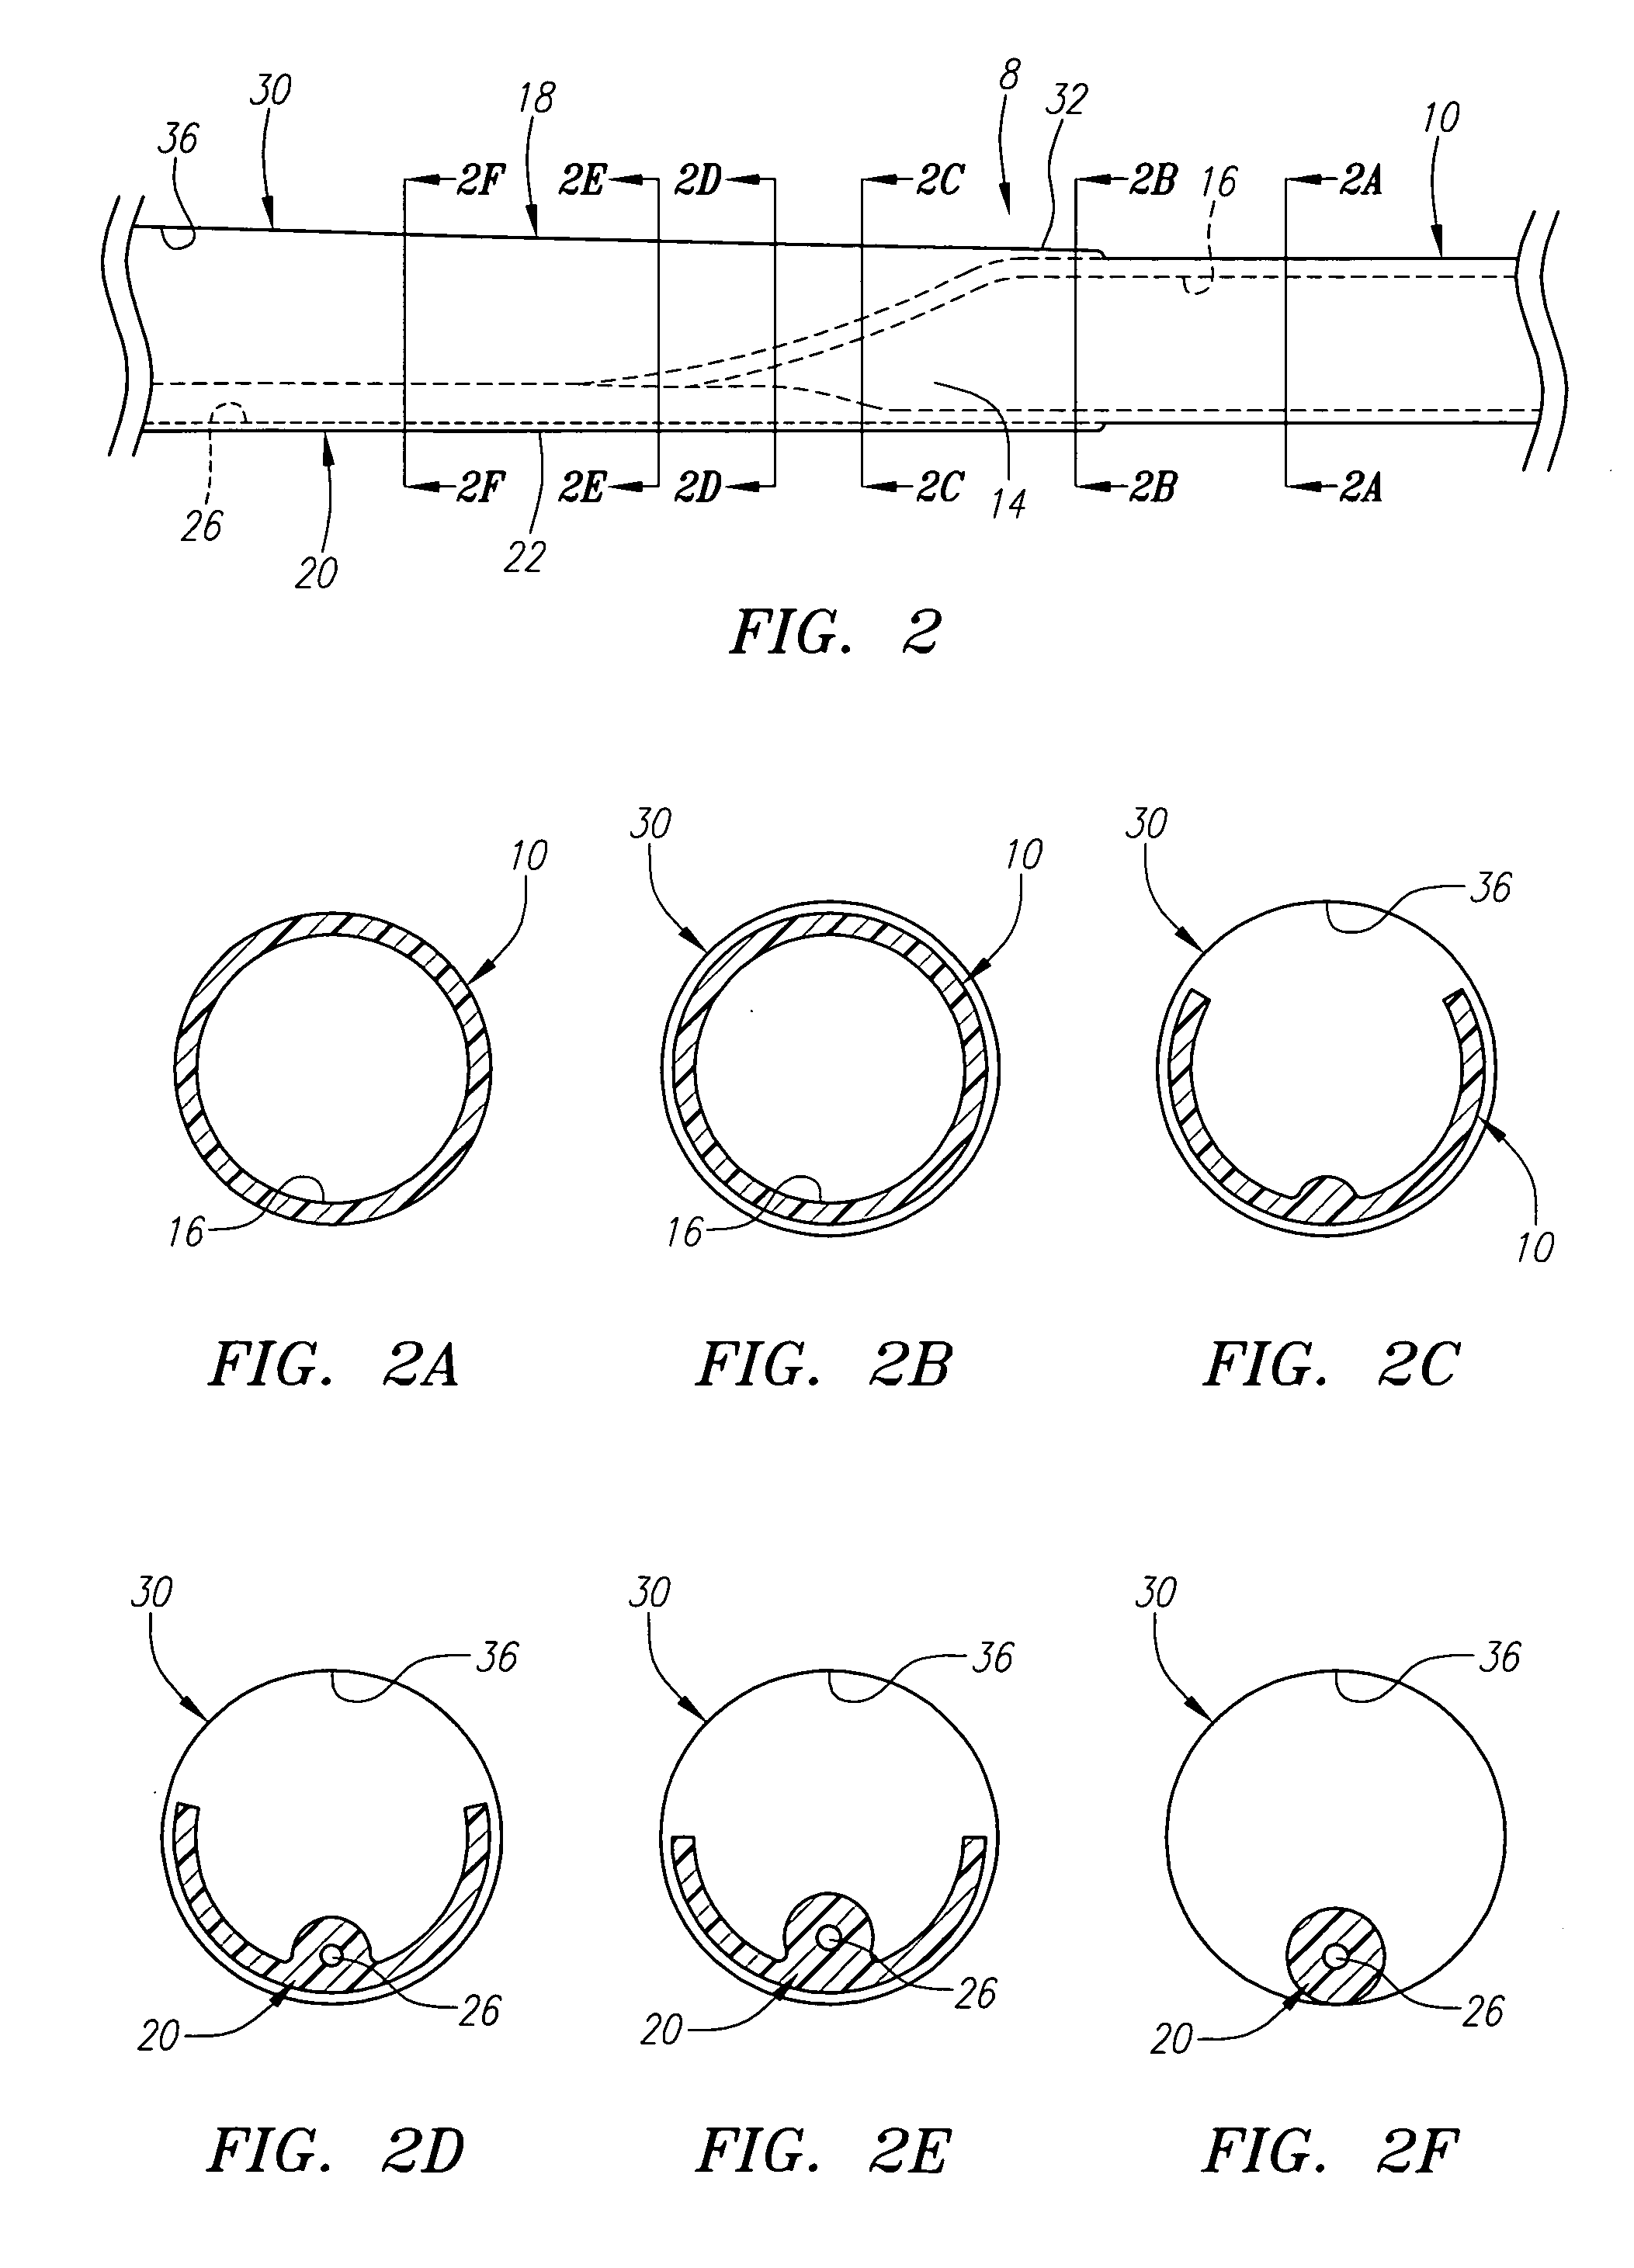 Expandable guide sheath with steerable backbone and methods for making and using them